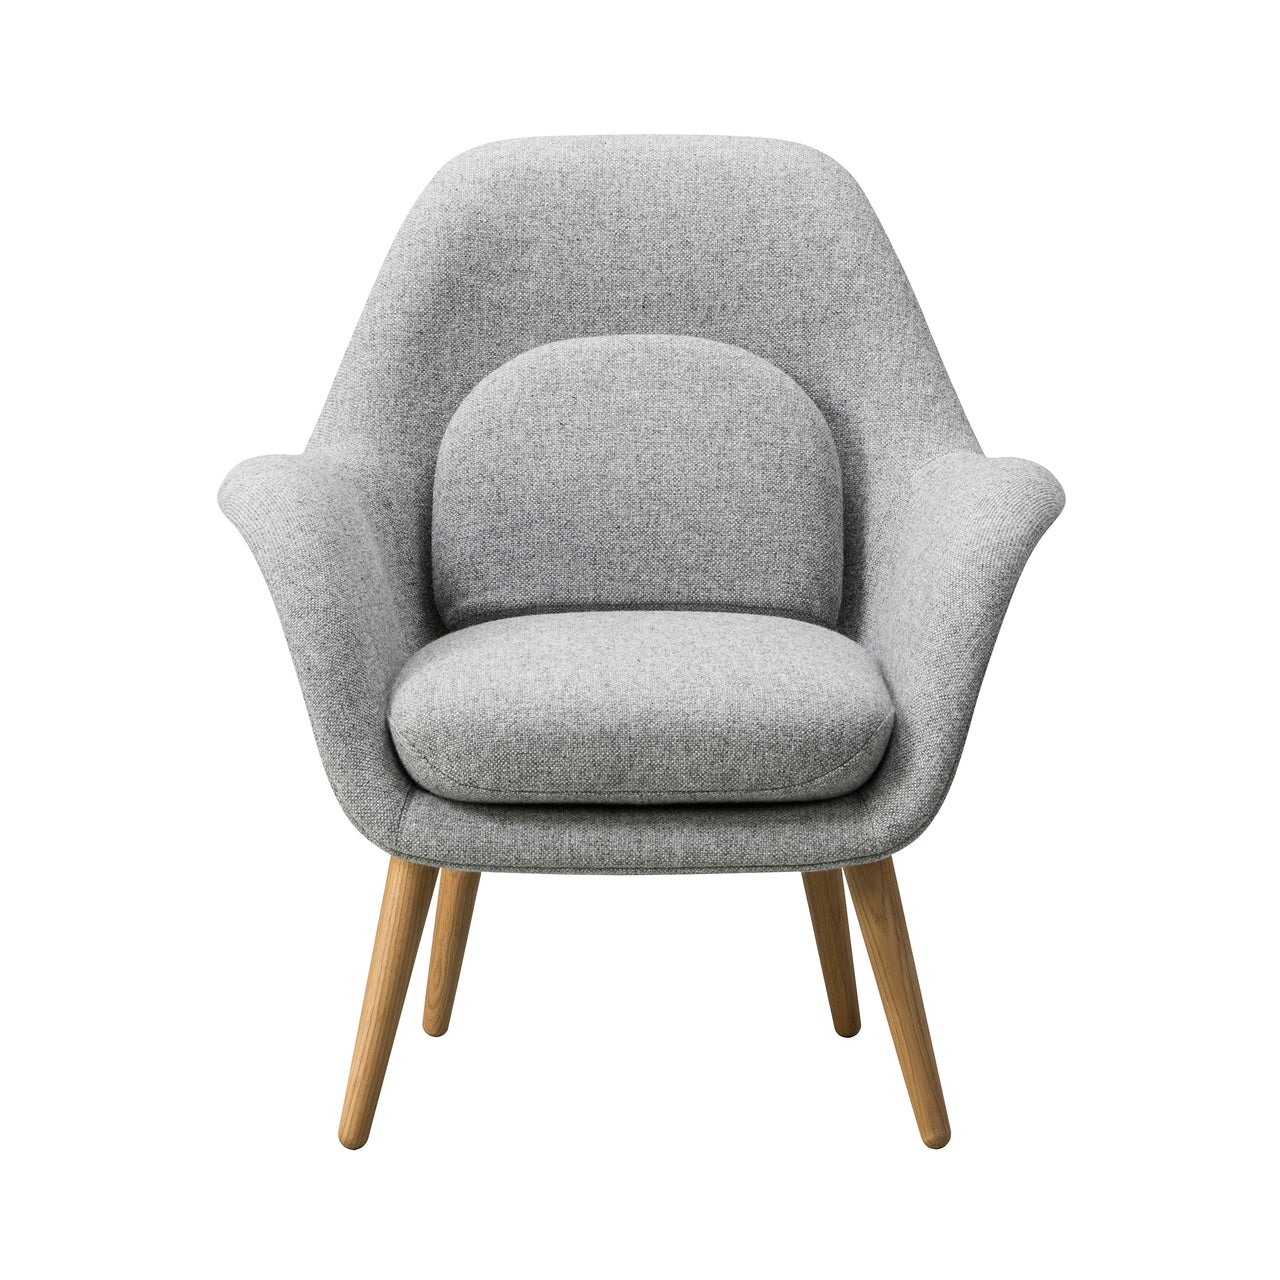 Swoon Lounge Chair Petit: Wood Base + Lacquered Oak